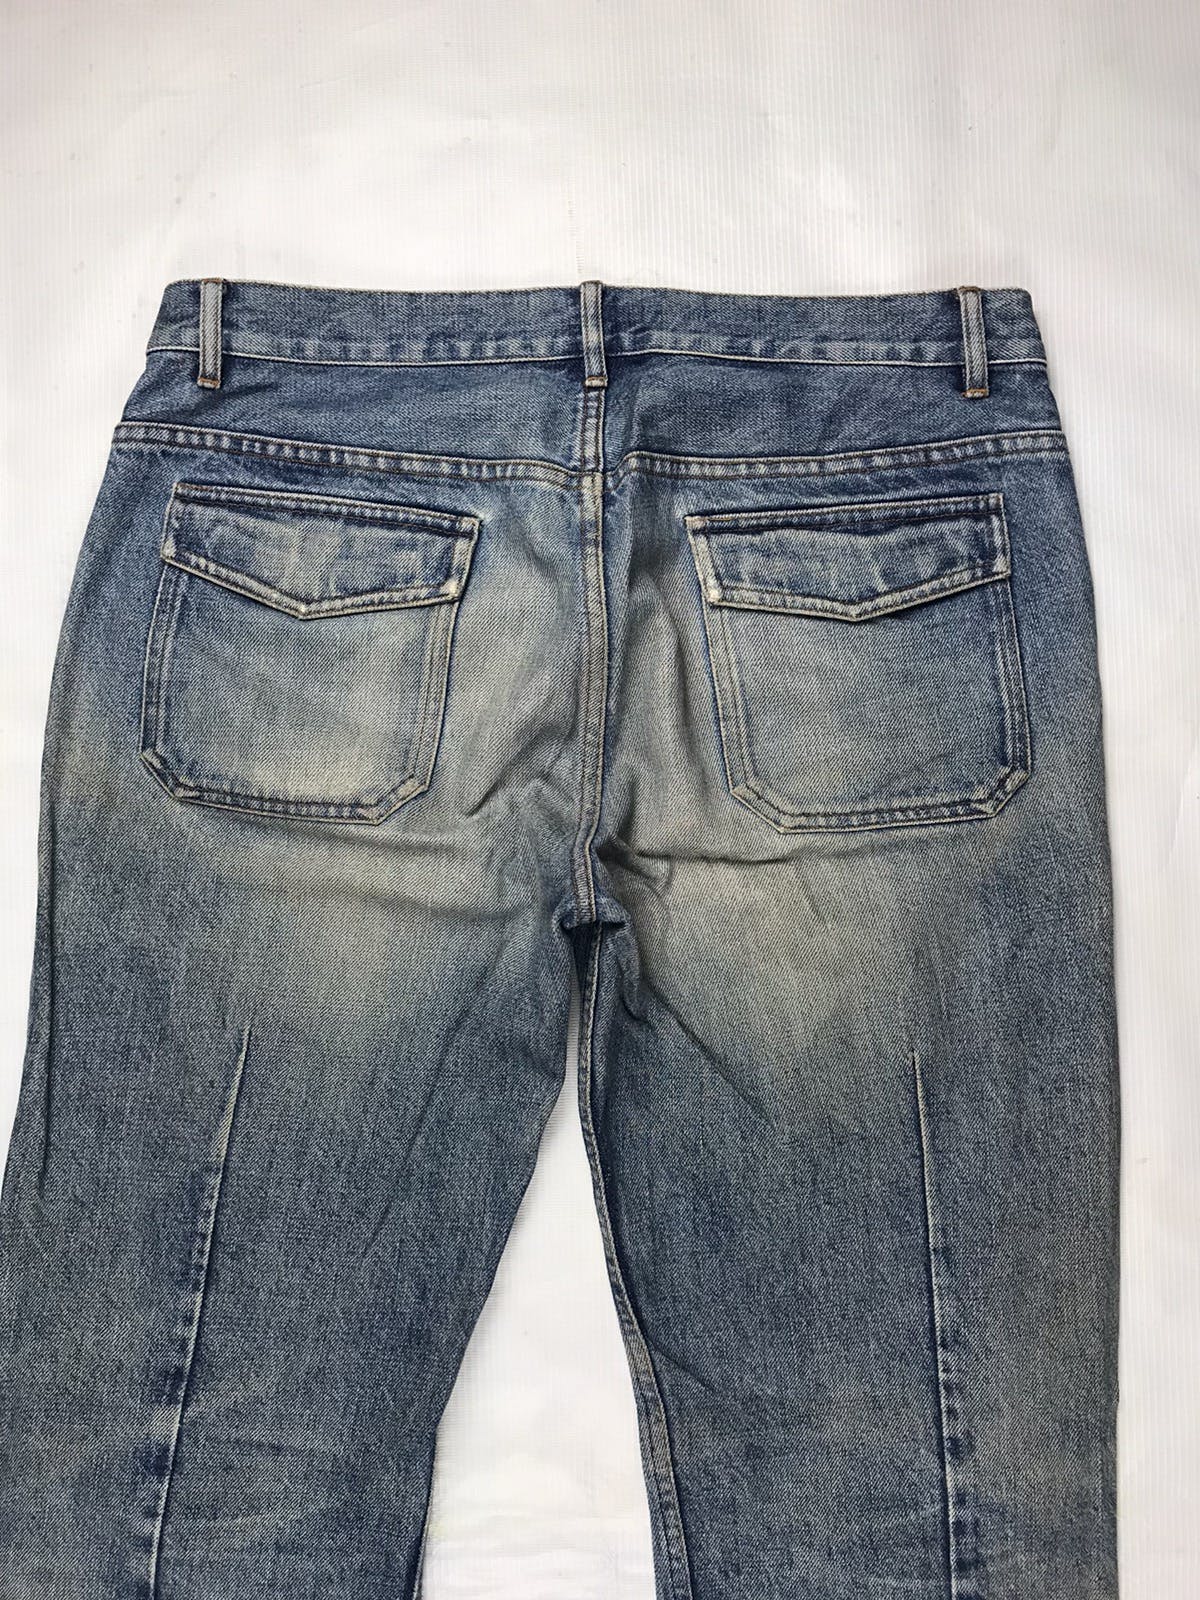 Rare!! A.P.C patch pocket distressed denim Made in Japan - 12